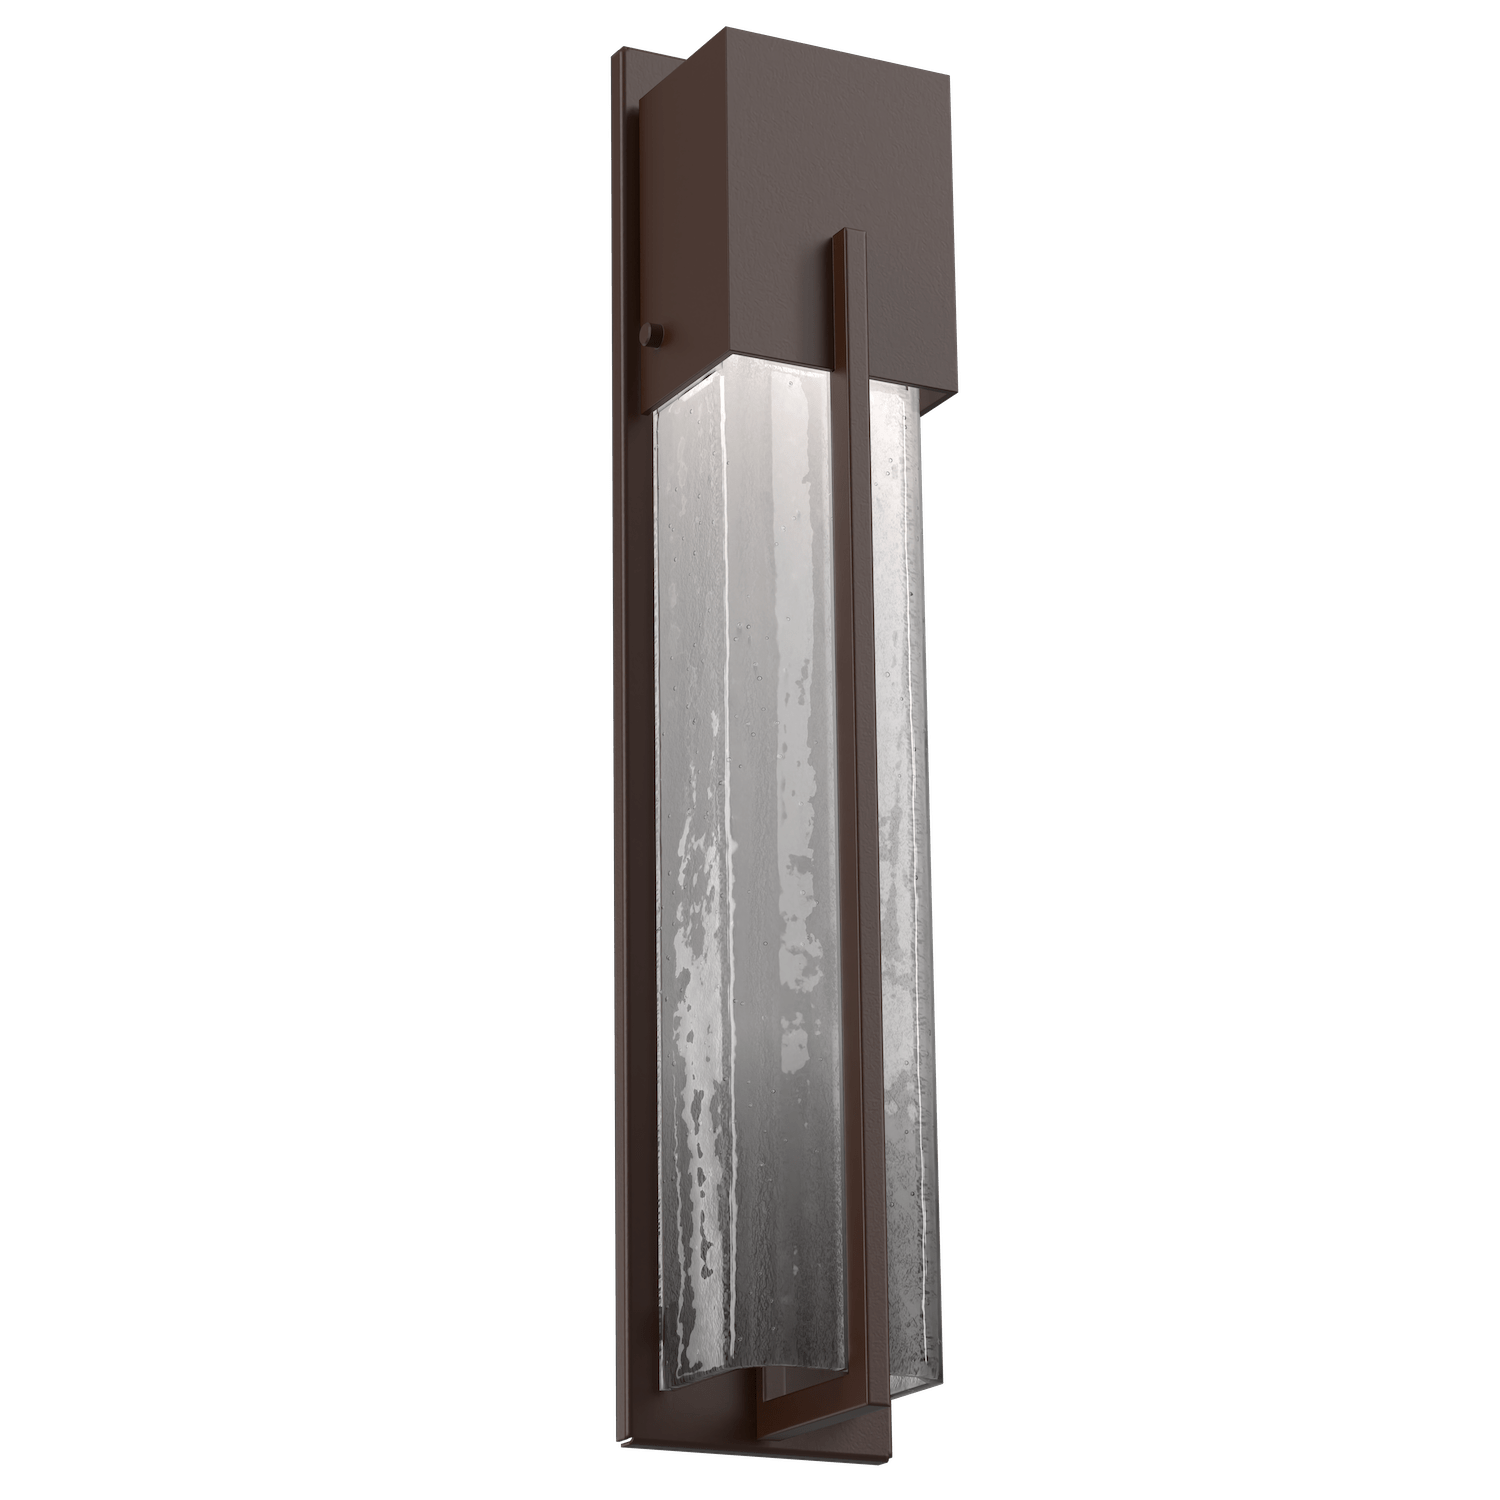 Hammerton Studio Square Outdoor Cover Sconce Outdoor l Wall Hammerton Studio 23 Statuary Bronze (Outdoor) Frosted Granite